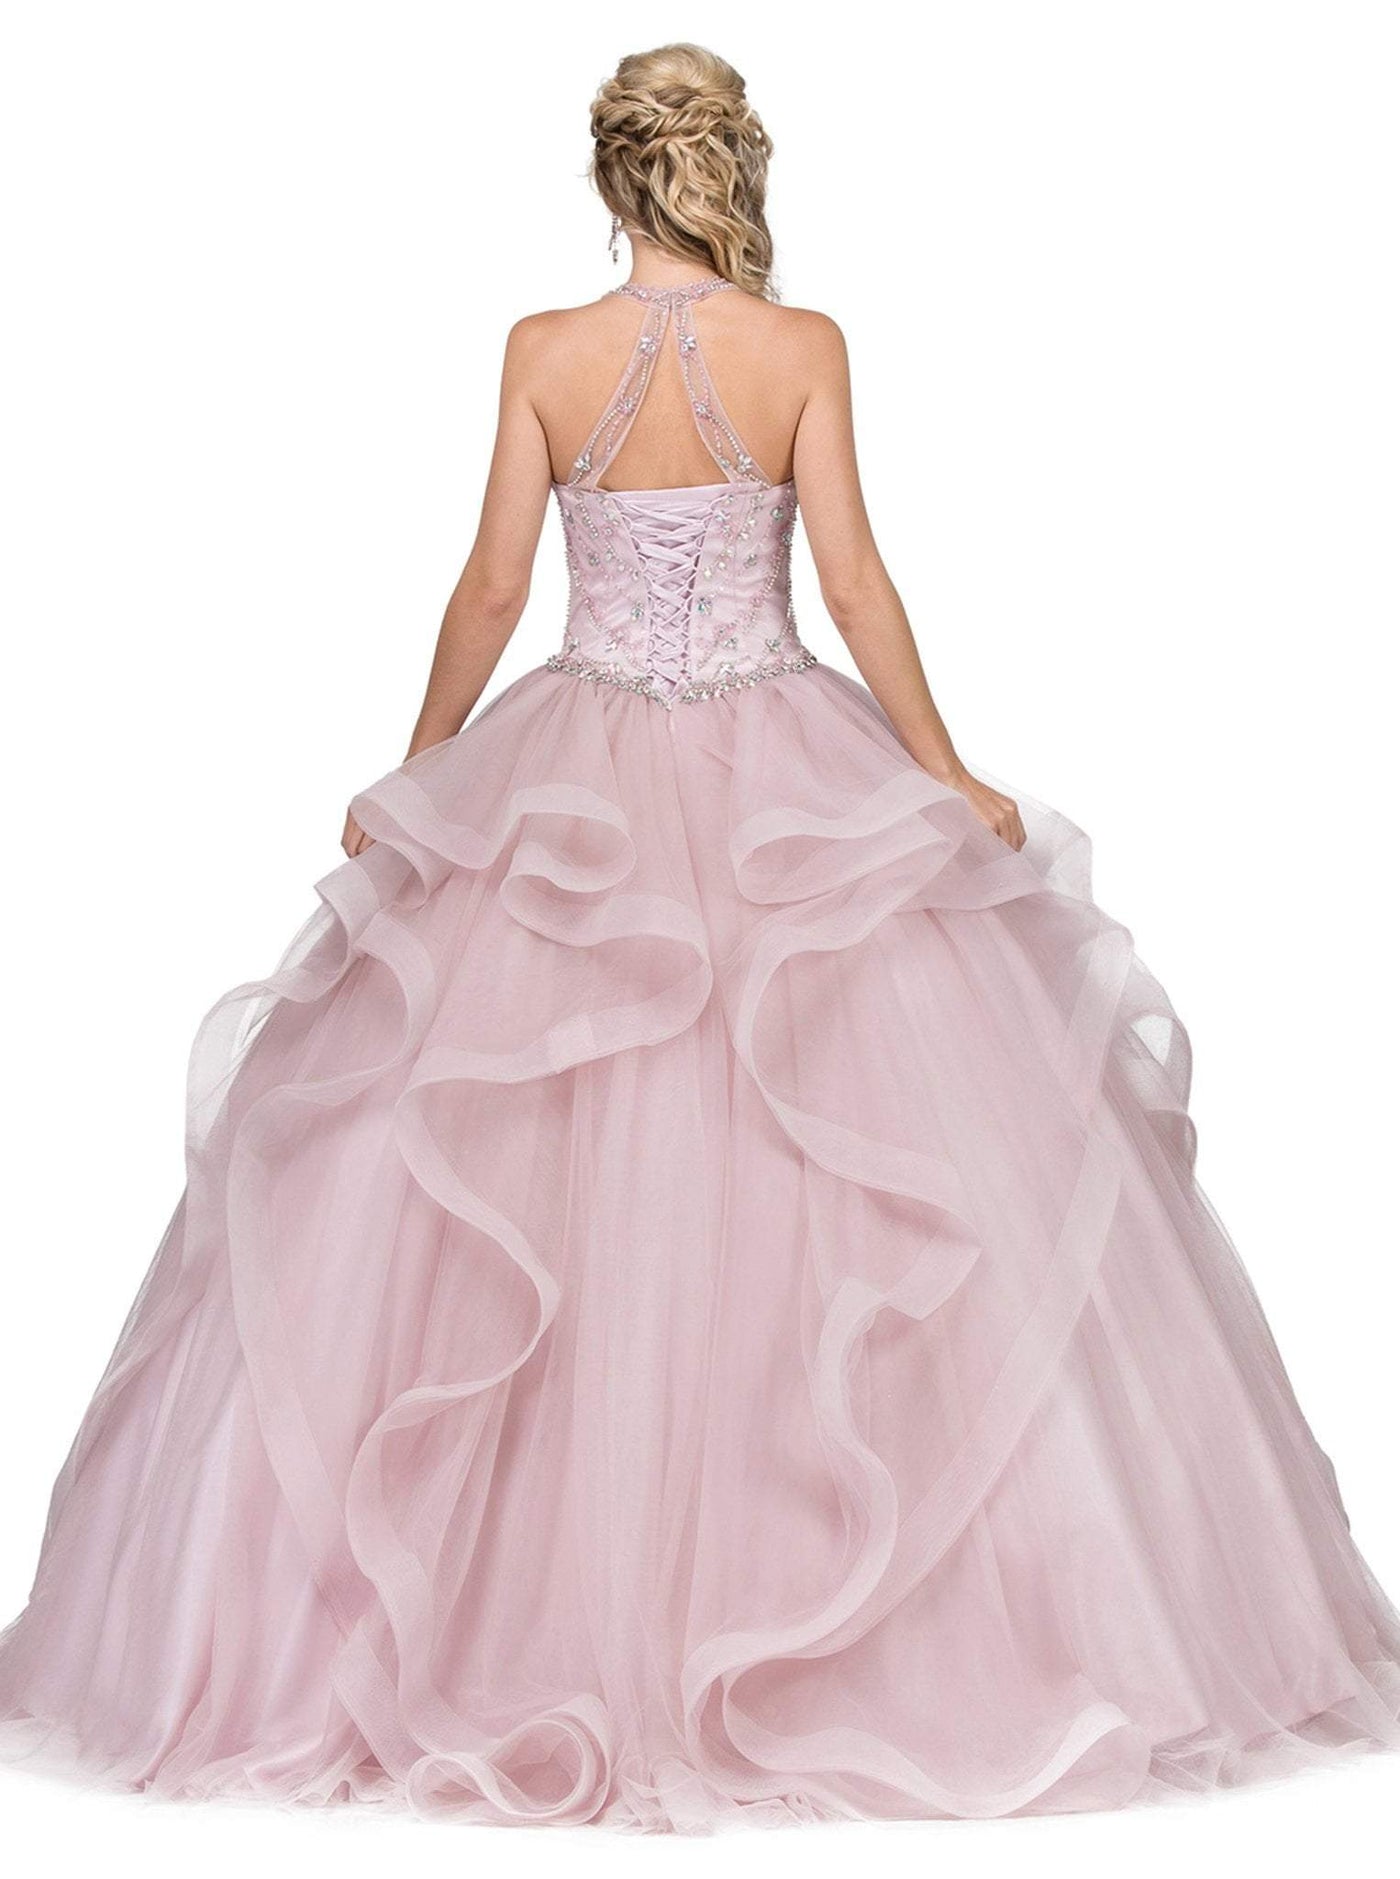 Dancing Queen - 1279 Illusion Halter Ruffled Quinceanera Gown Special Occasion Dress